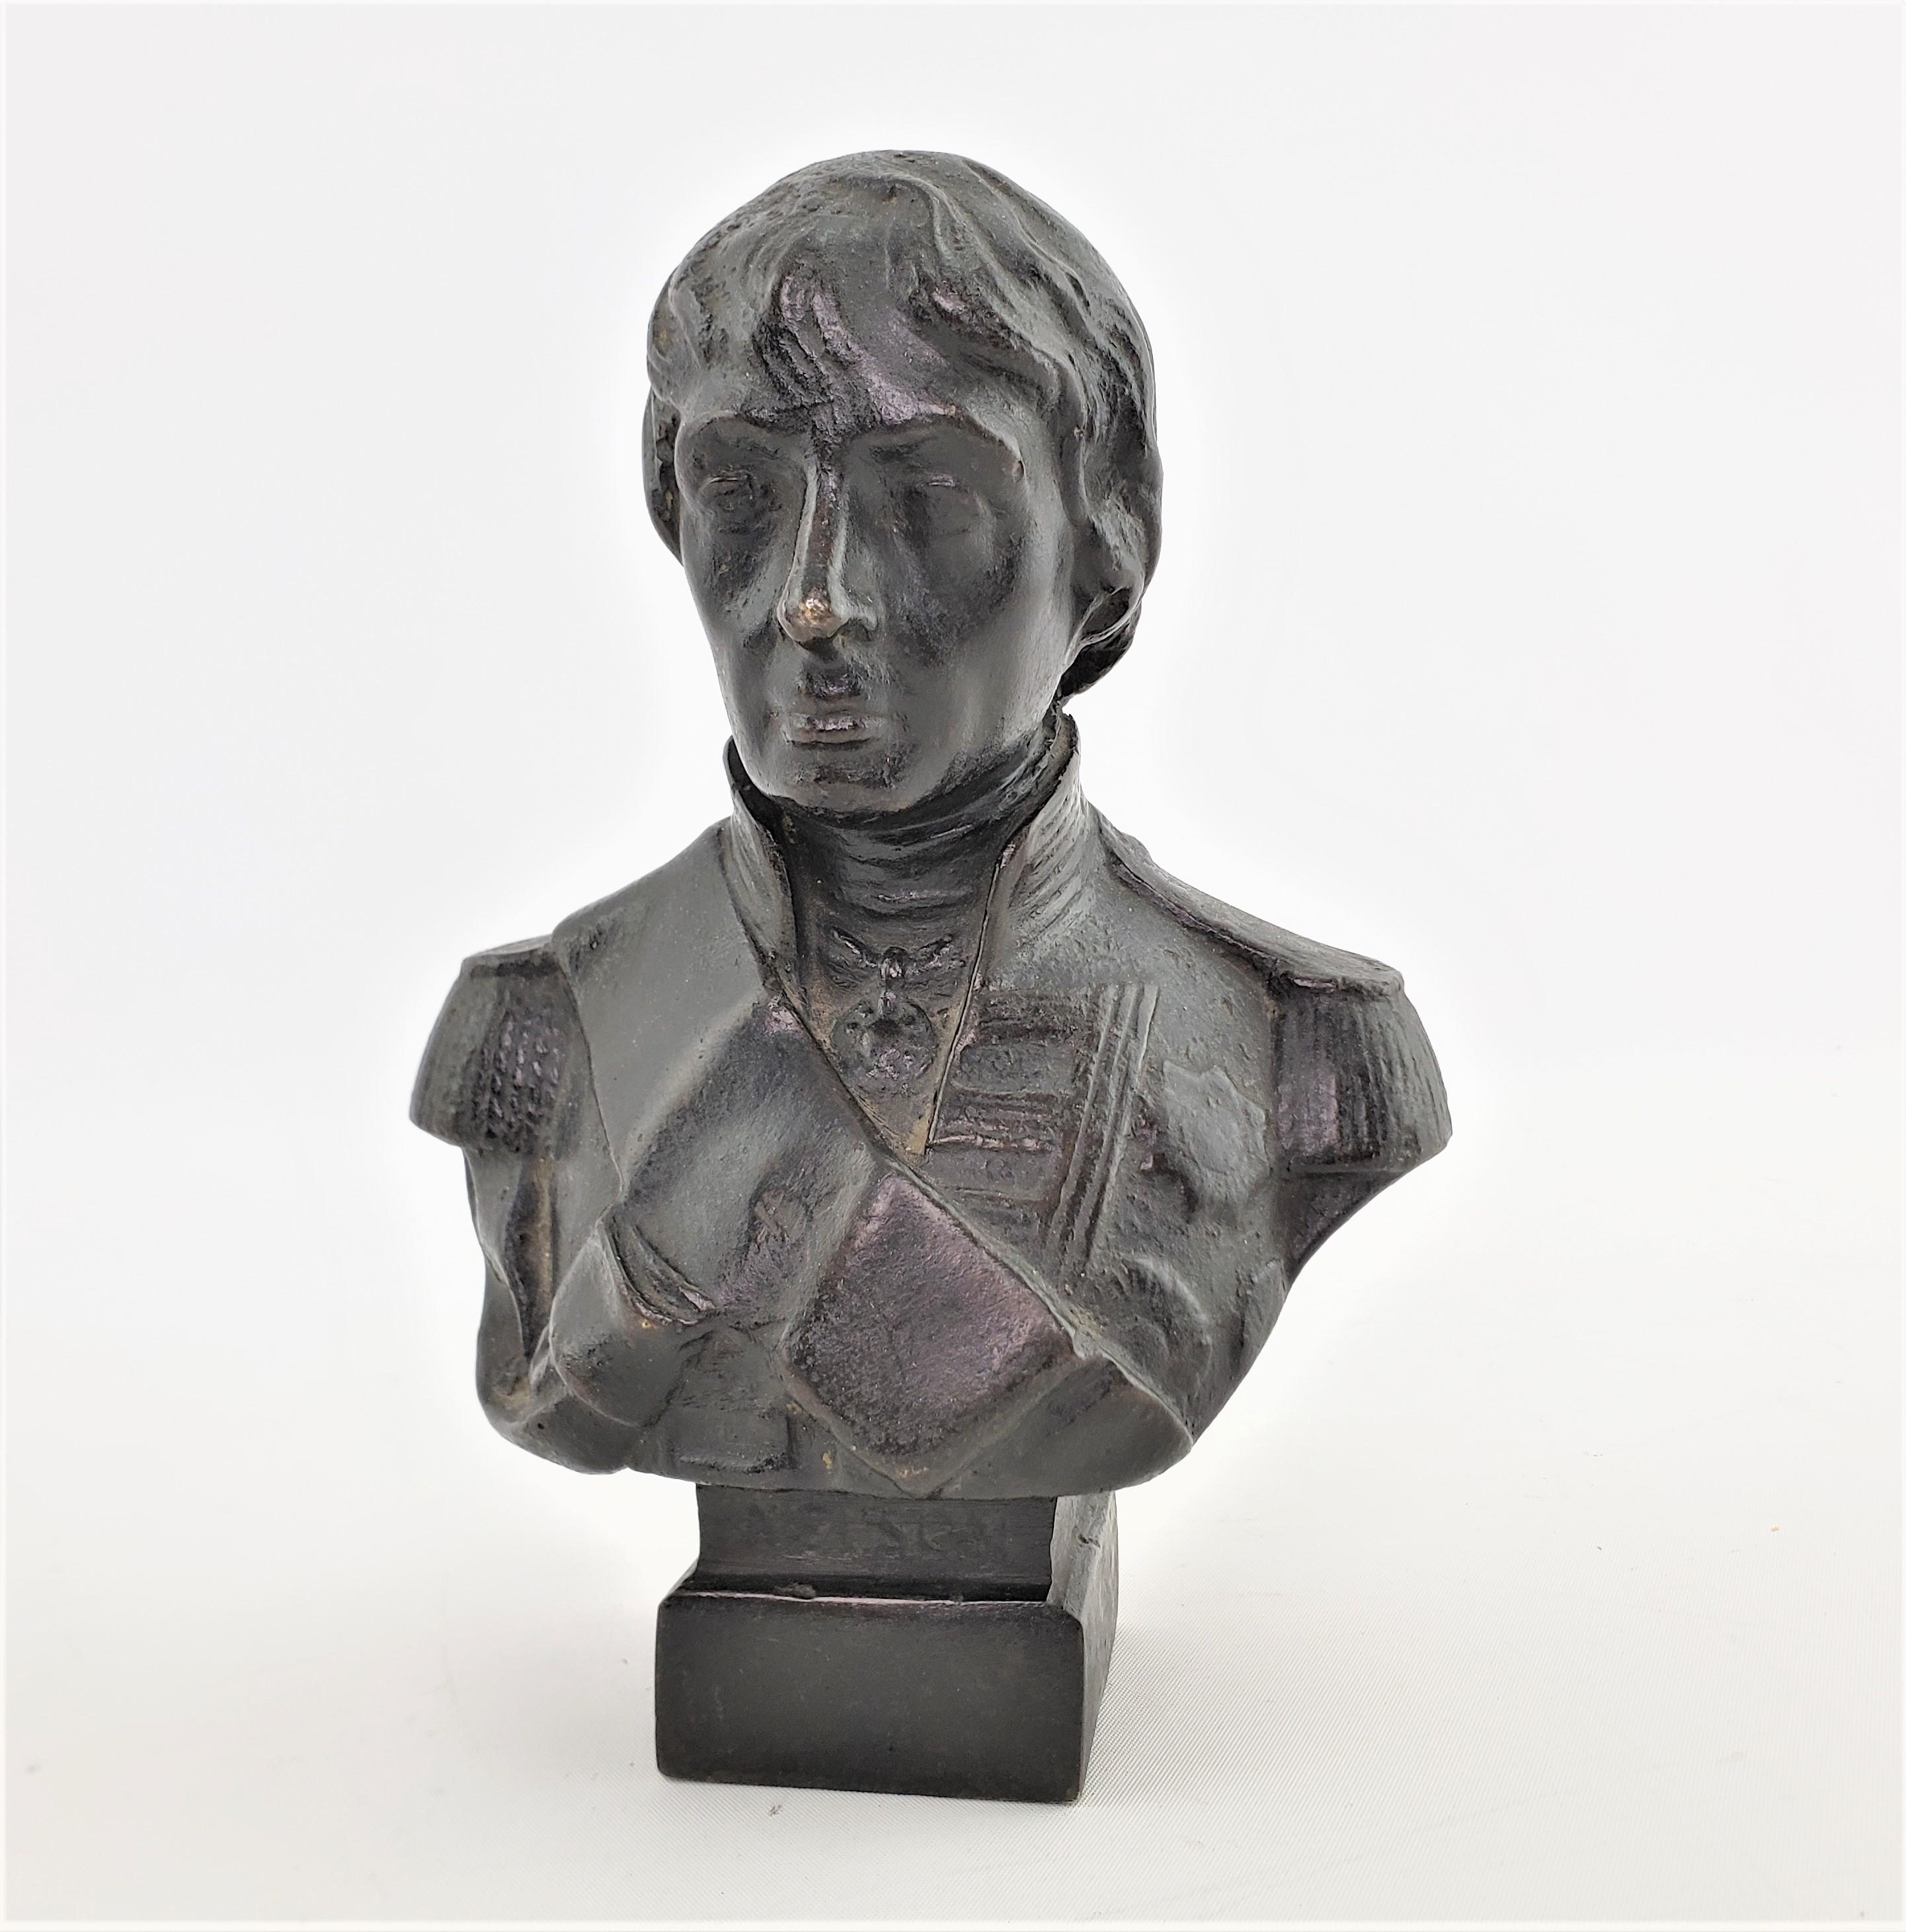 This antique cast bronze bust is unsigned and has no foundry mark, but is presumed to have originated from England and dates to approximately 1890 and done in the period Victorian style. The well executed bronze depicts Admiral Lord Nelson and shows